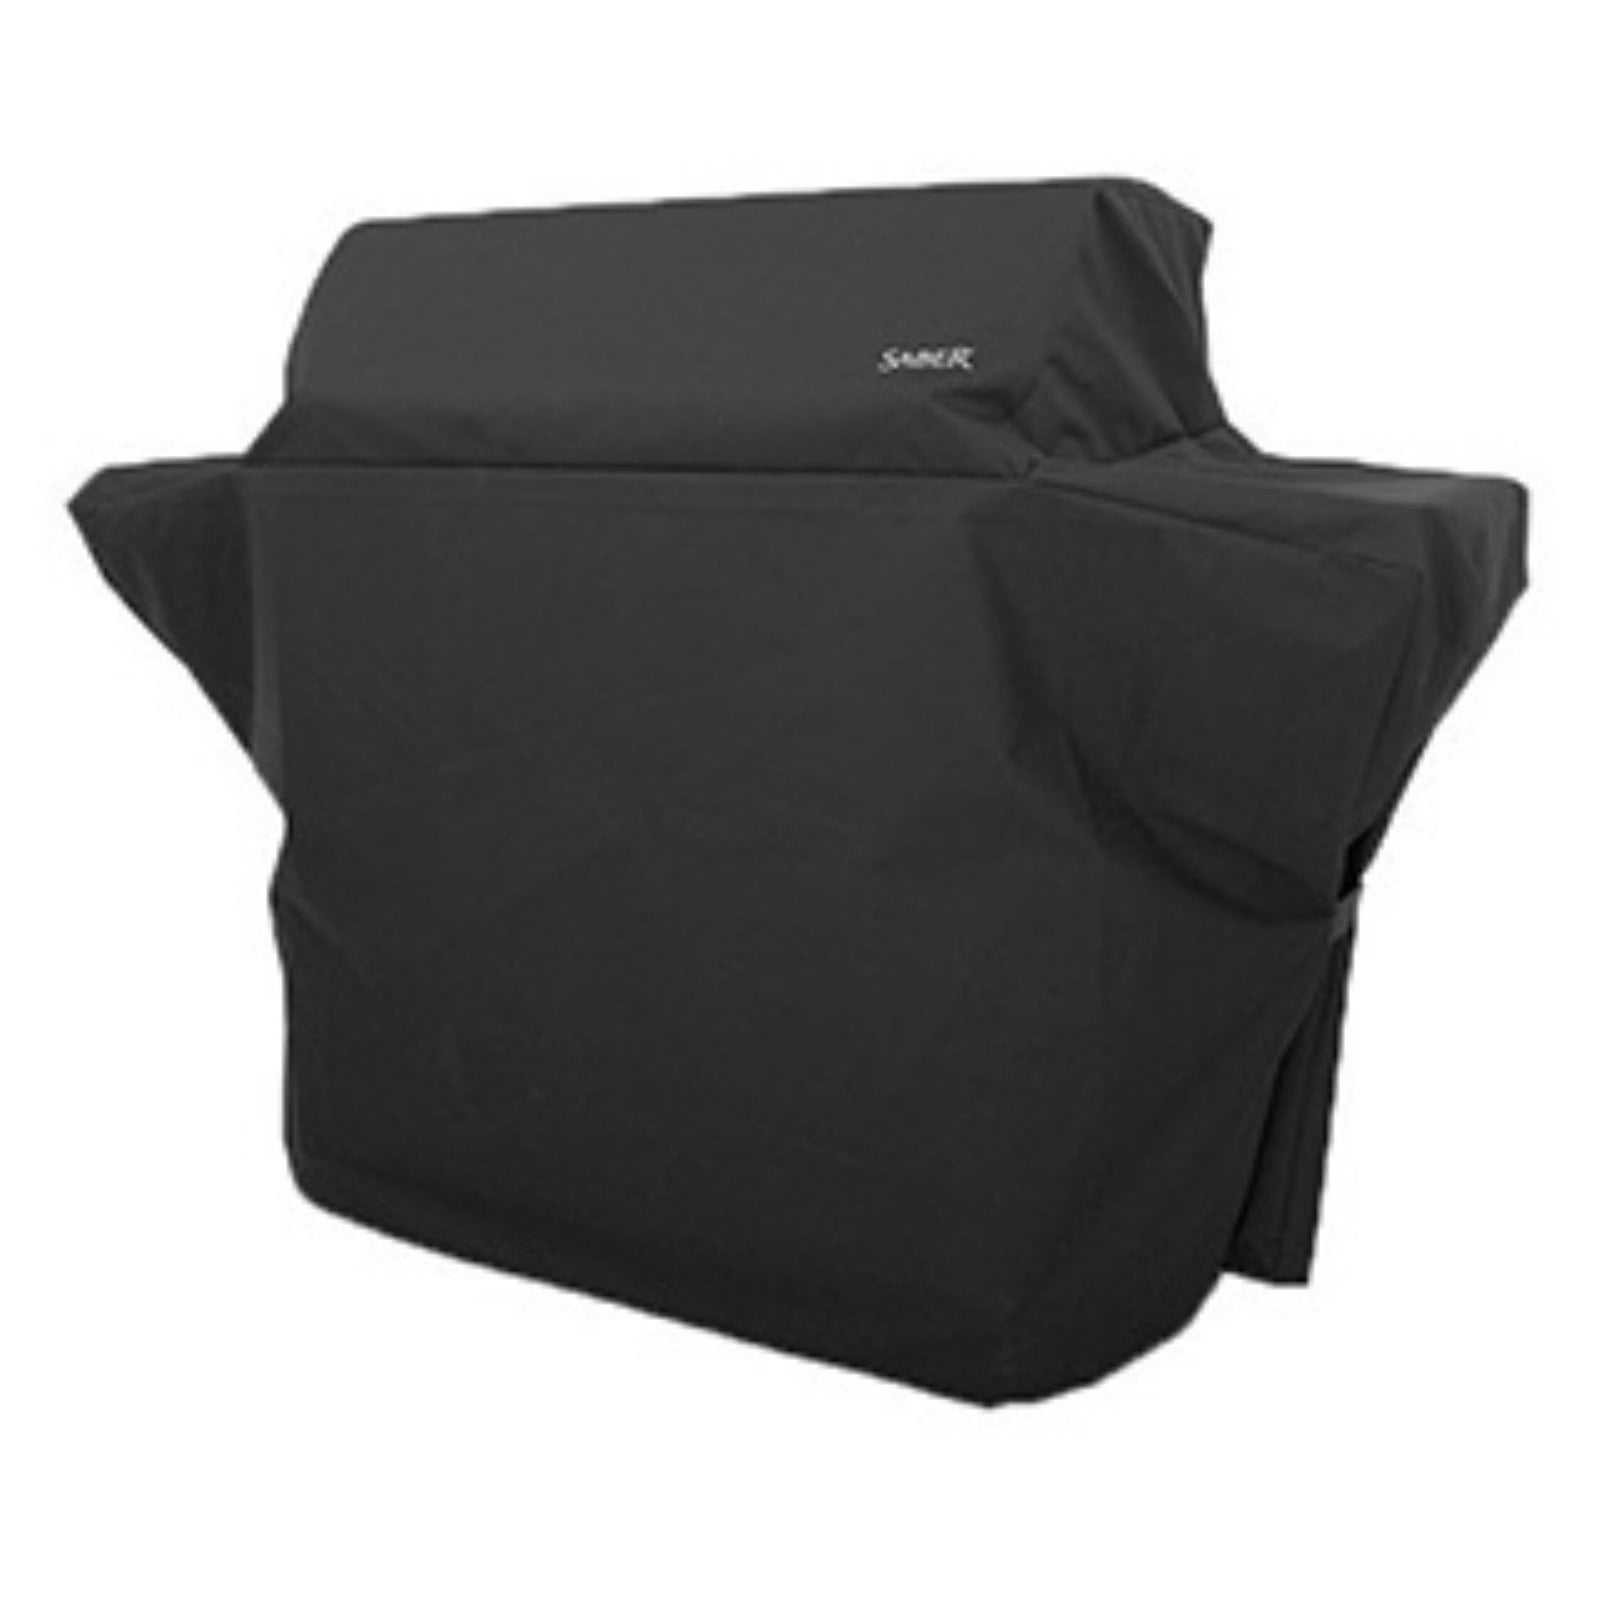 Saber 670 Cart Grill Cover